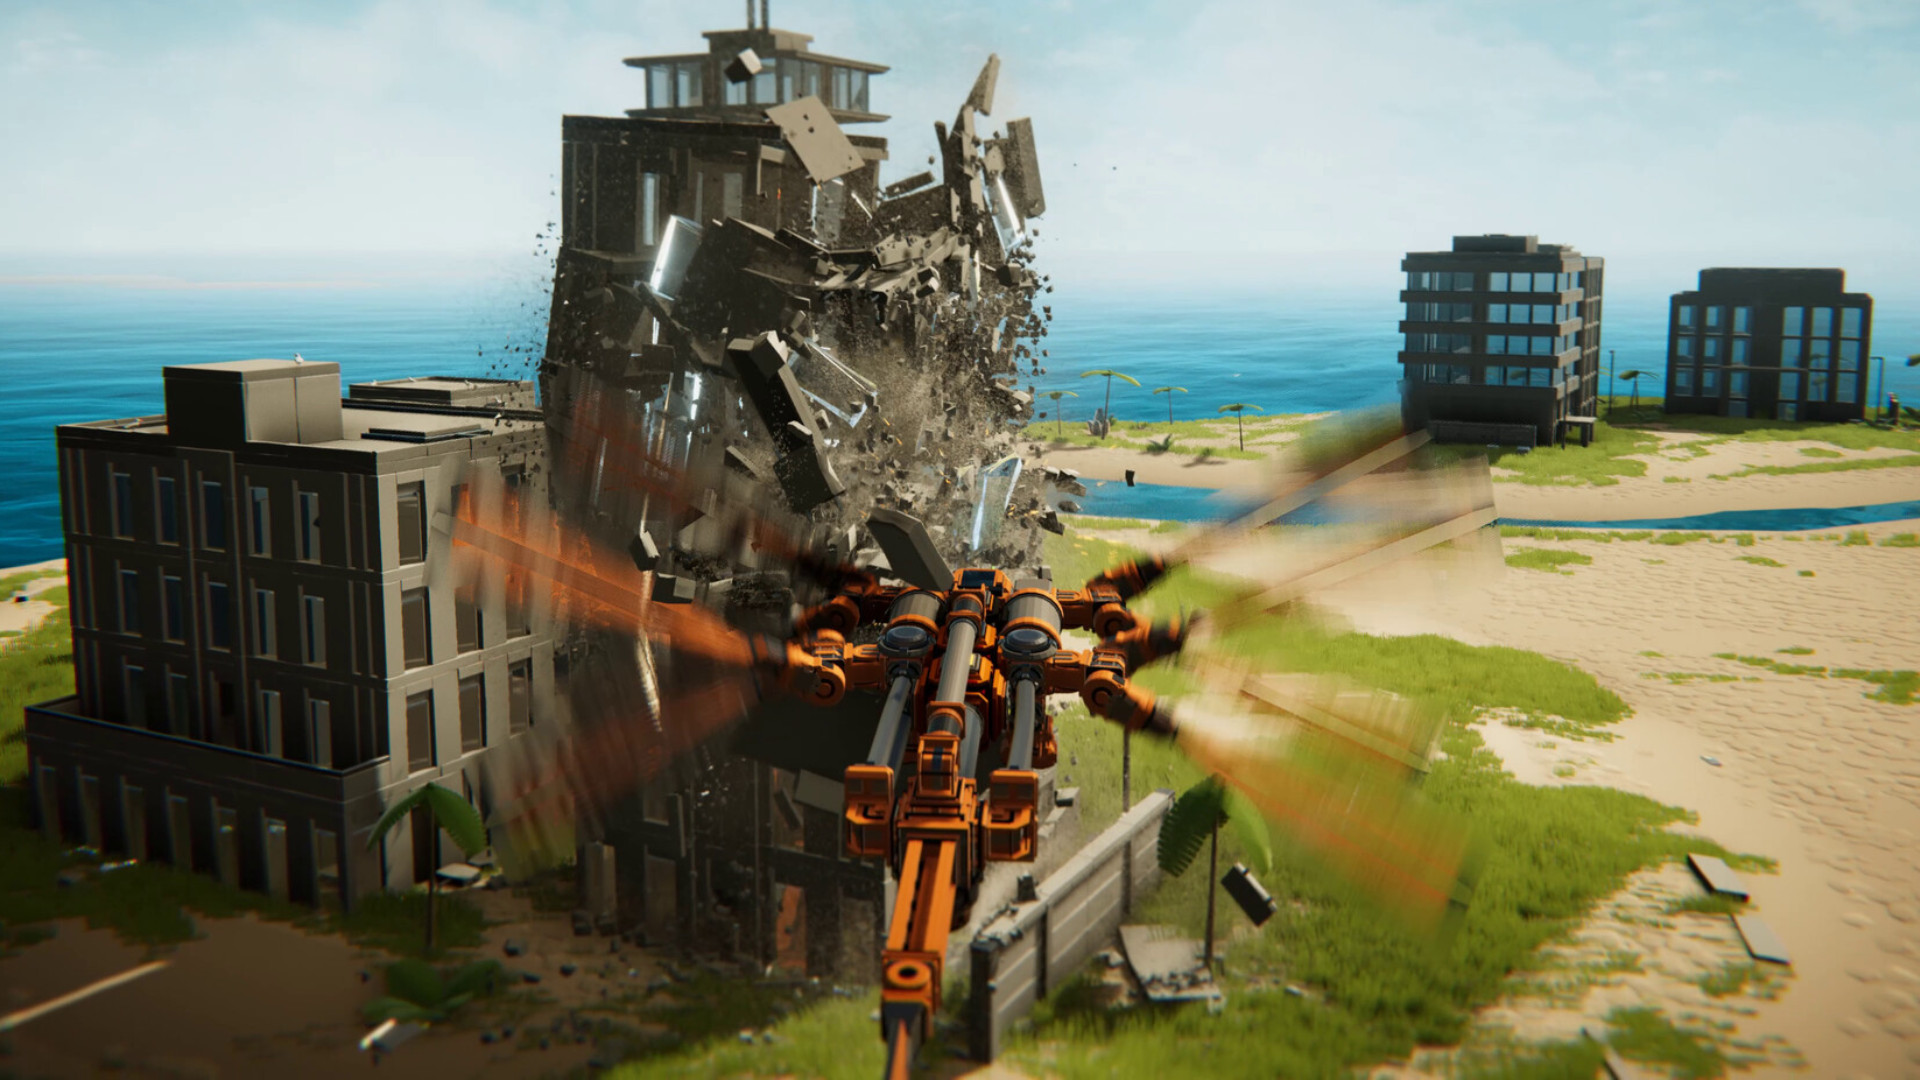 Instruments of Destruction version 1.0 is a delightful new physics sandbox - A bee-like plane with vibrating wings fires at a high-rise building, causing it to crumble.